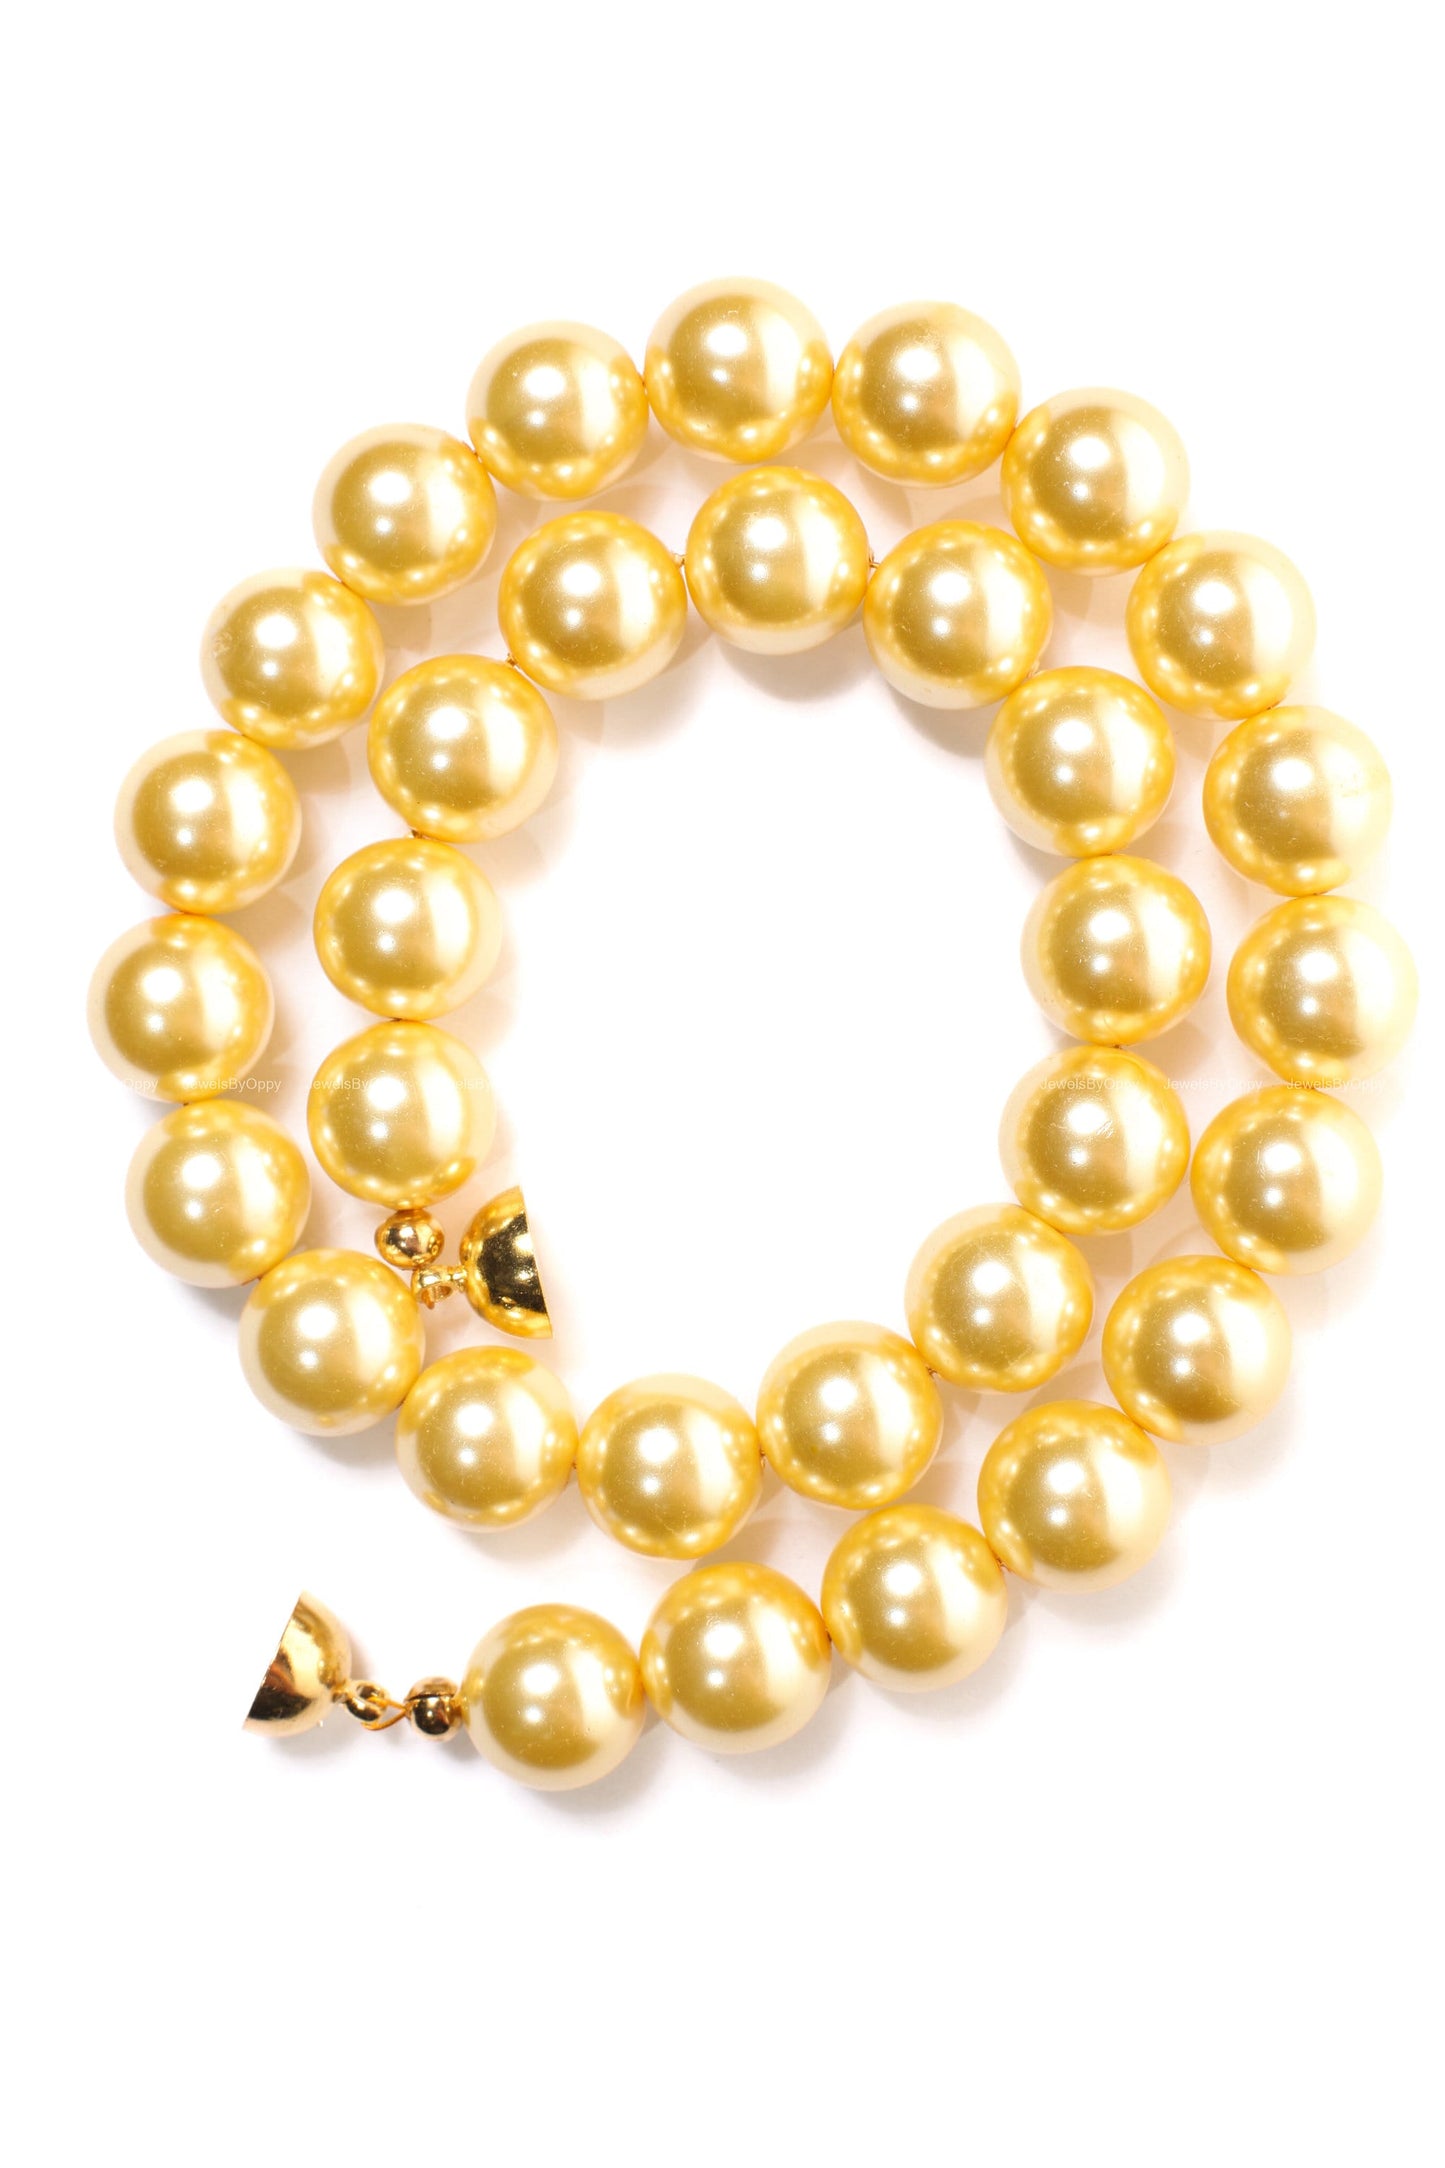 Golden Yellow South Sea Shell Pearl 14mm Large High Luster Statement Necklace with Strong Magnetic Ball Clasp Necklace, Bridal, Gift for Her